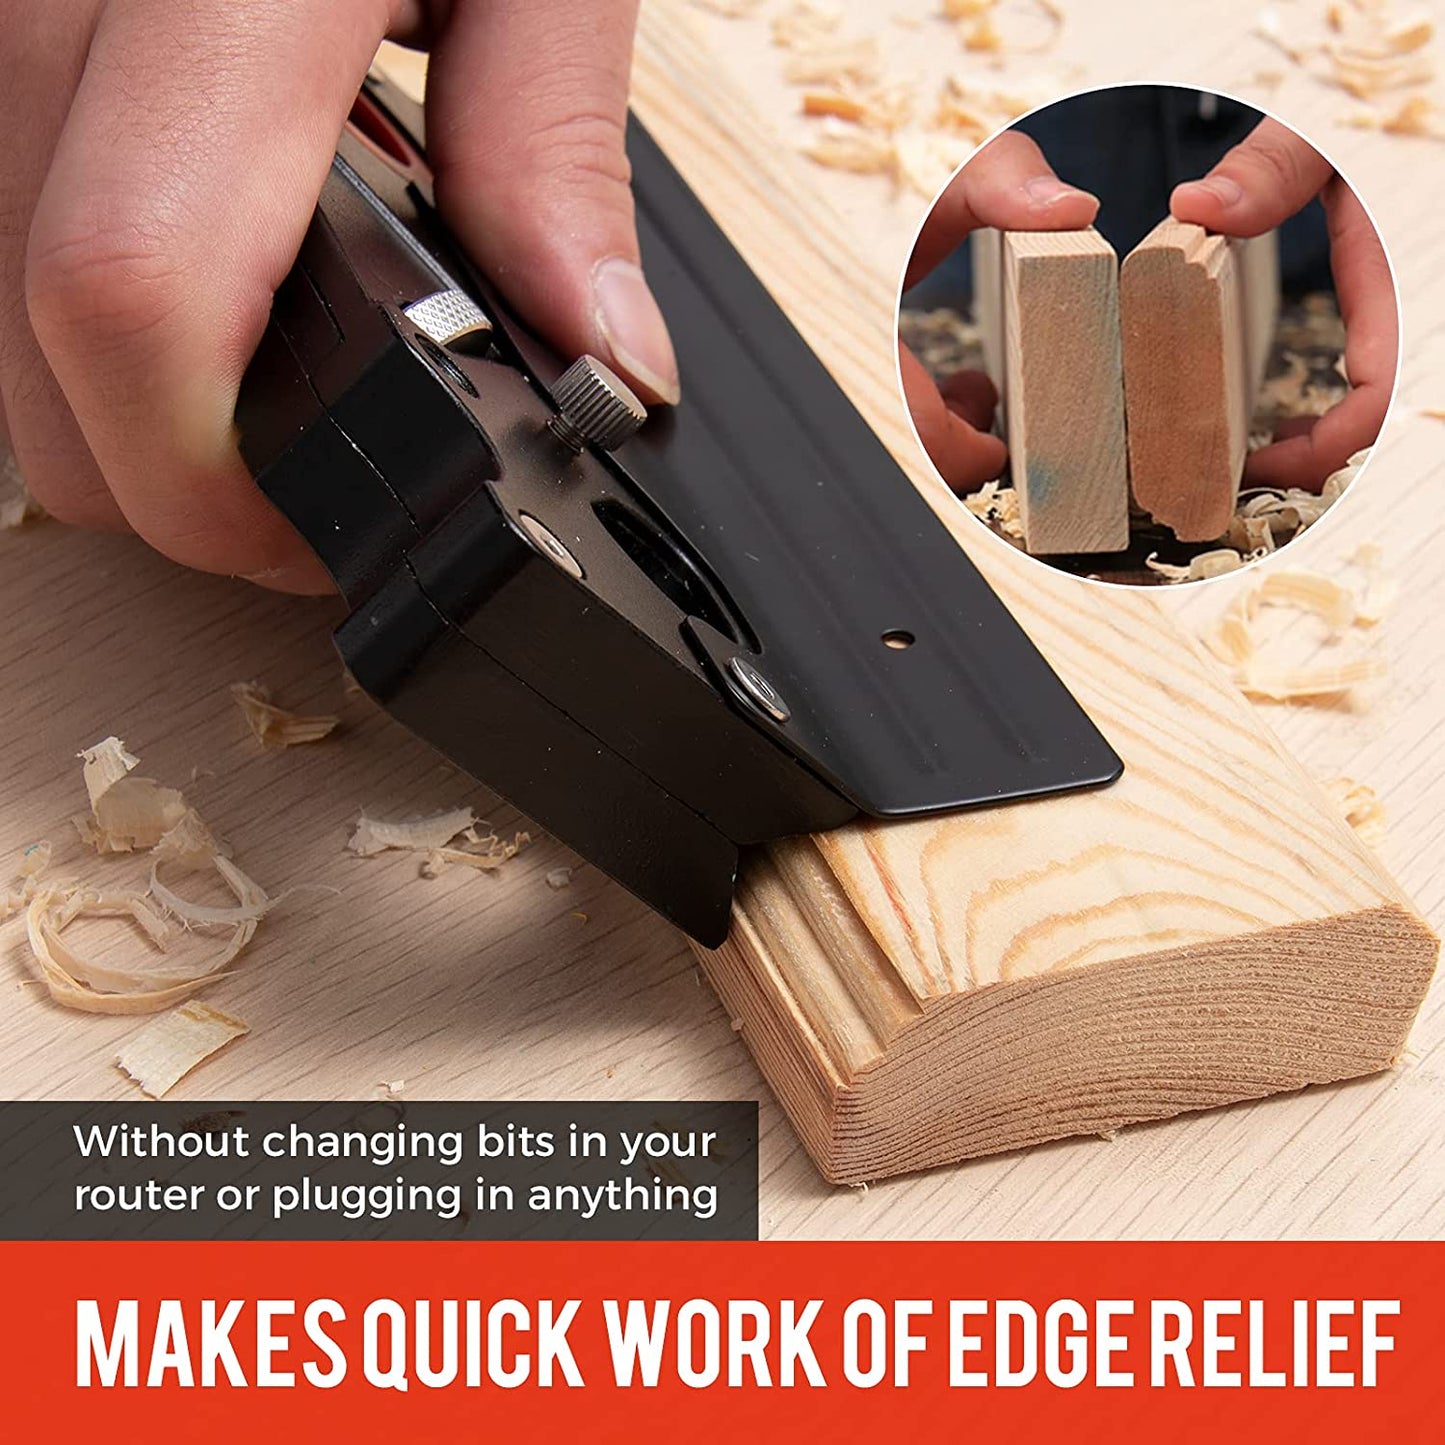 Chamfer Plane - Perfect Tool for Flattening and Smoothing Woodworking Edges and Corners